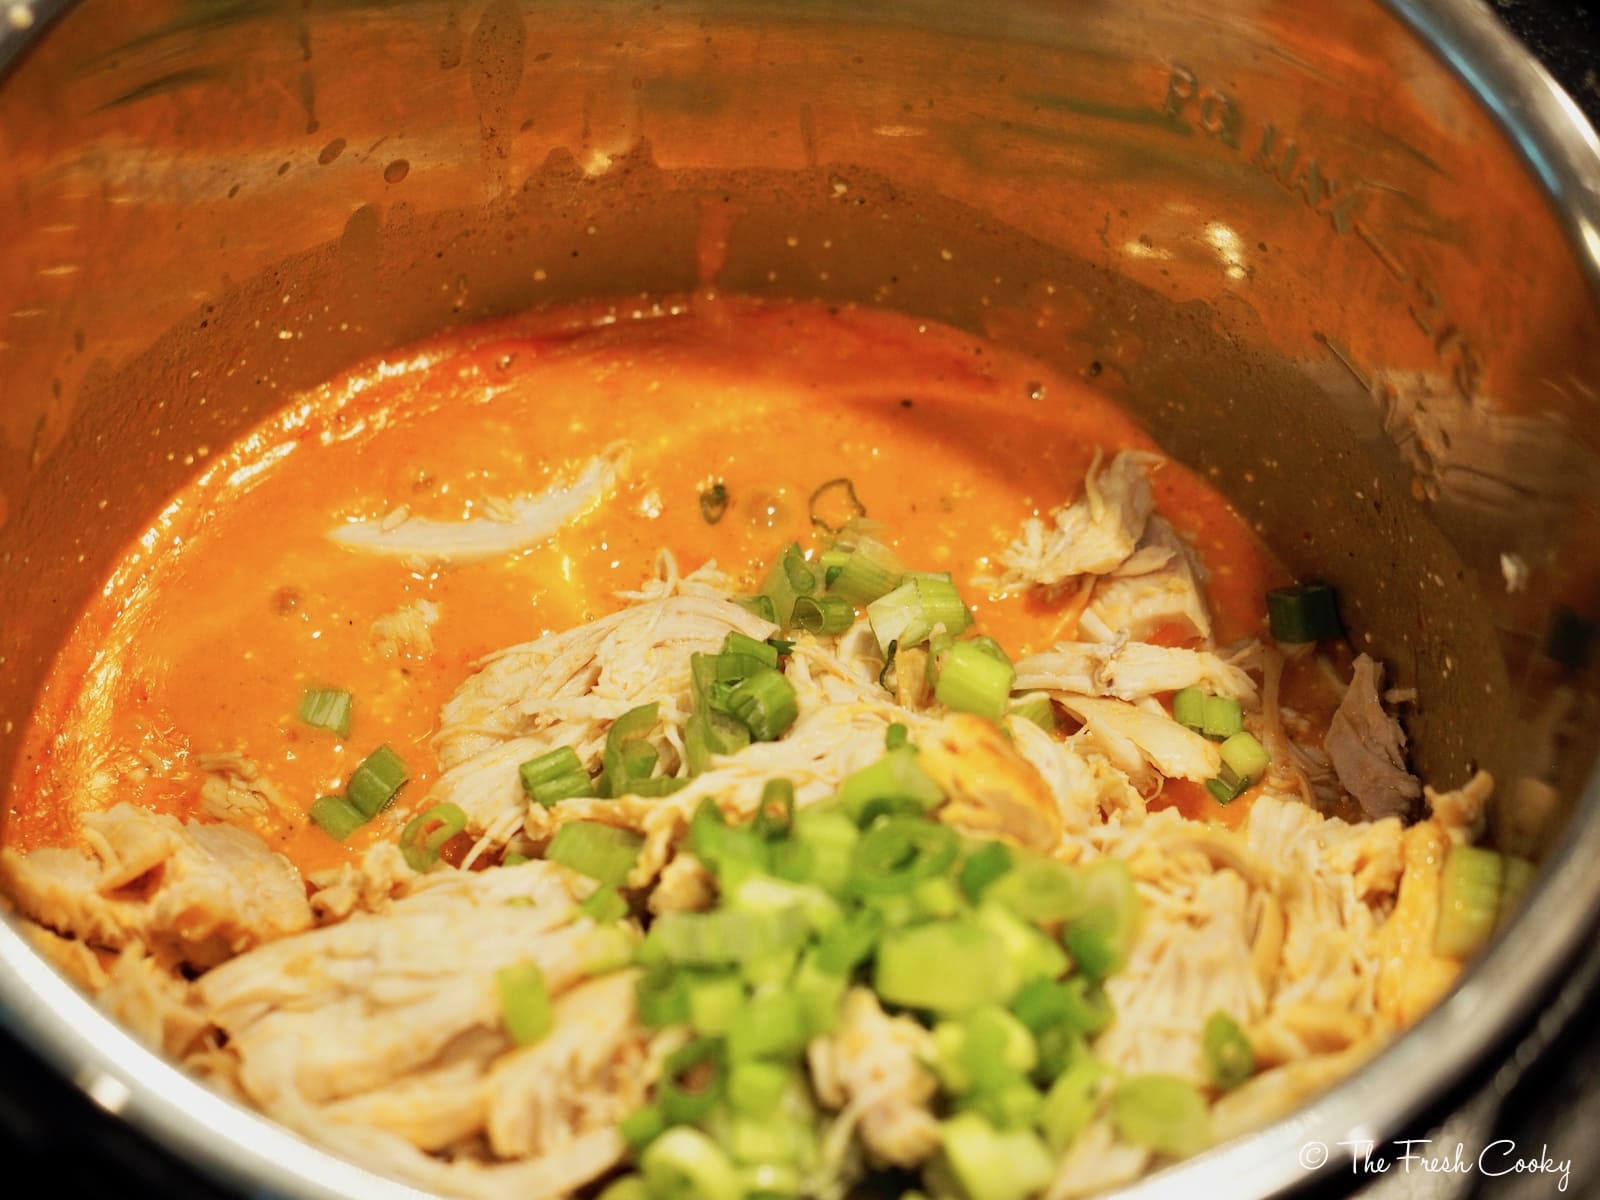 Tossing shredded chicken back in sauce with green onions and celery | thefreshcooky.com